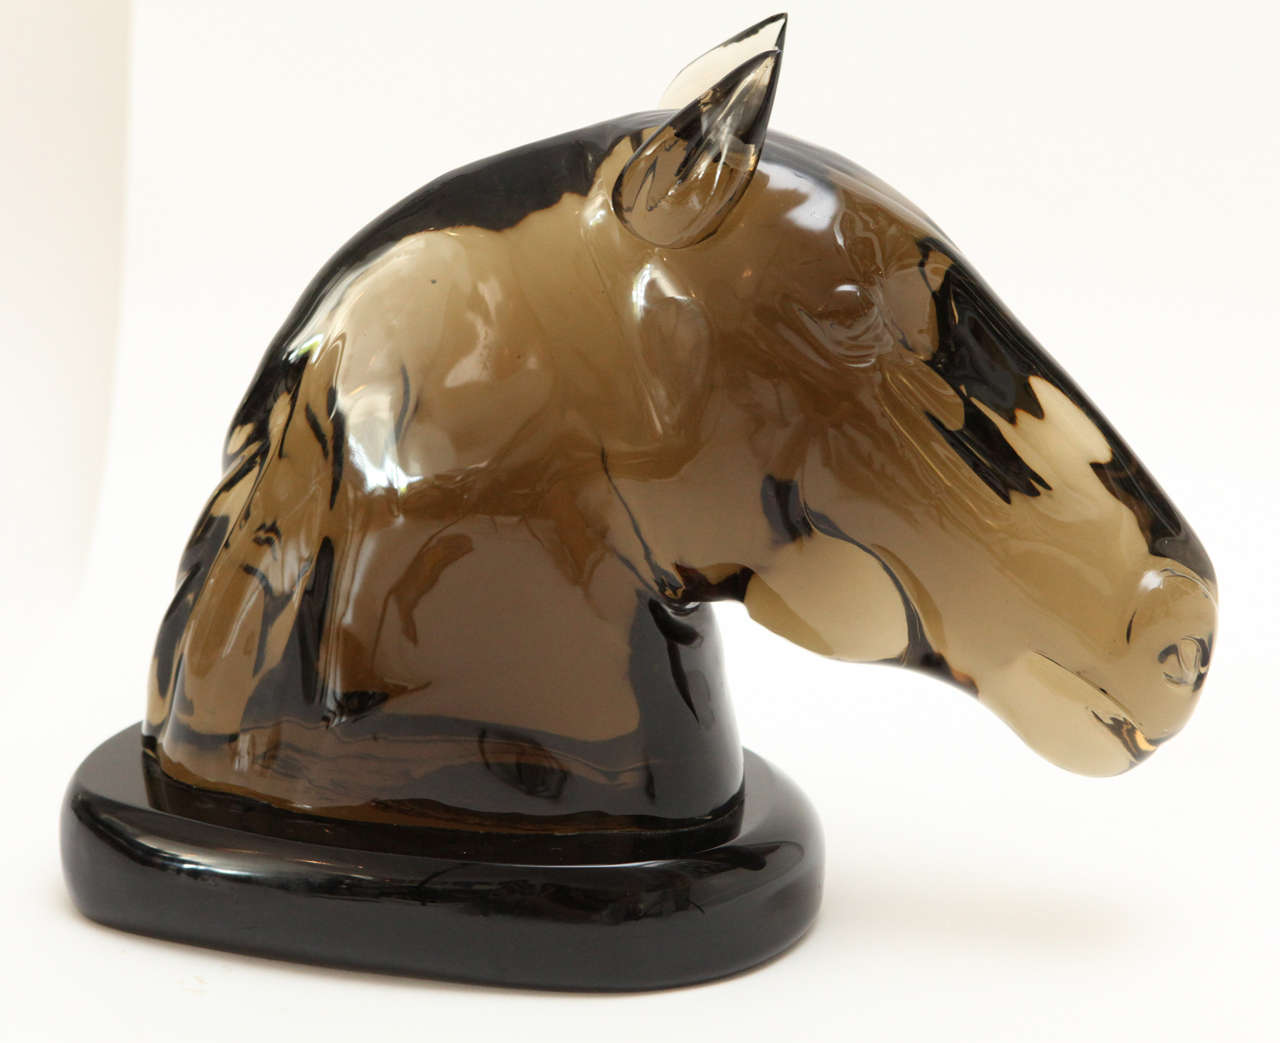 A stunning smoke grey Murano glass horse head sculpture by master glass artist, Ermanno Nason. Signed and dated on the base 